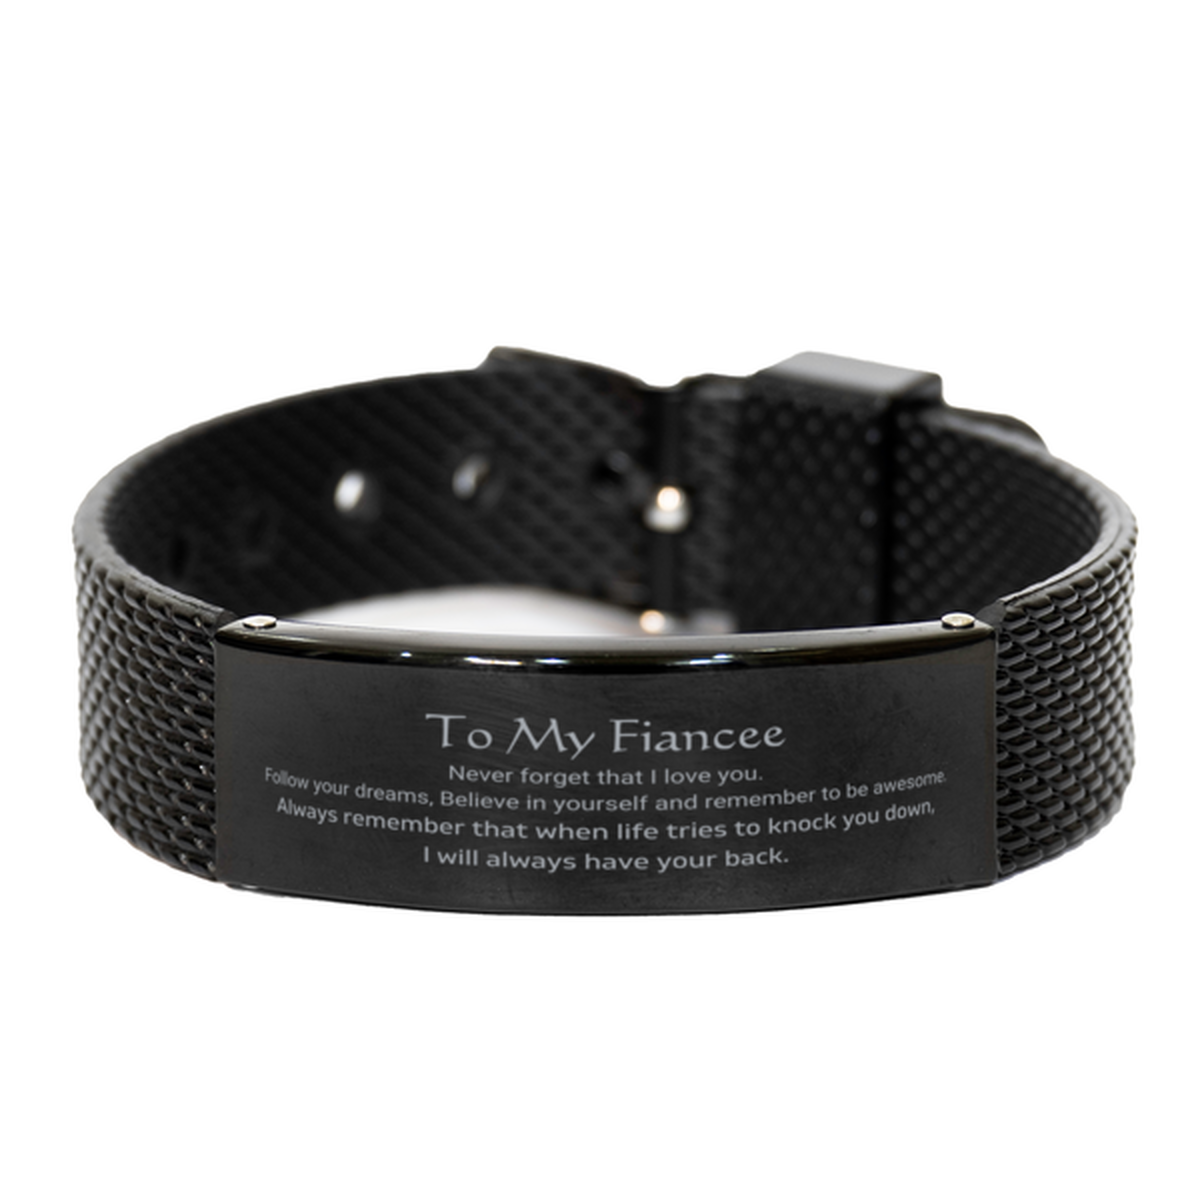 Inspirational Gifts for Fiancee, Follow your dreams, Believe in yourself, Fiancee Black Shark Mesh Bracelet, Birthday Christmas Unique Gifts For Fiancee